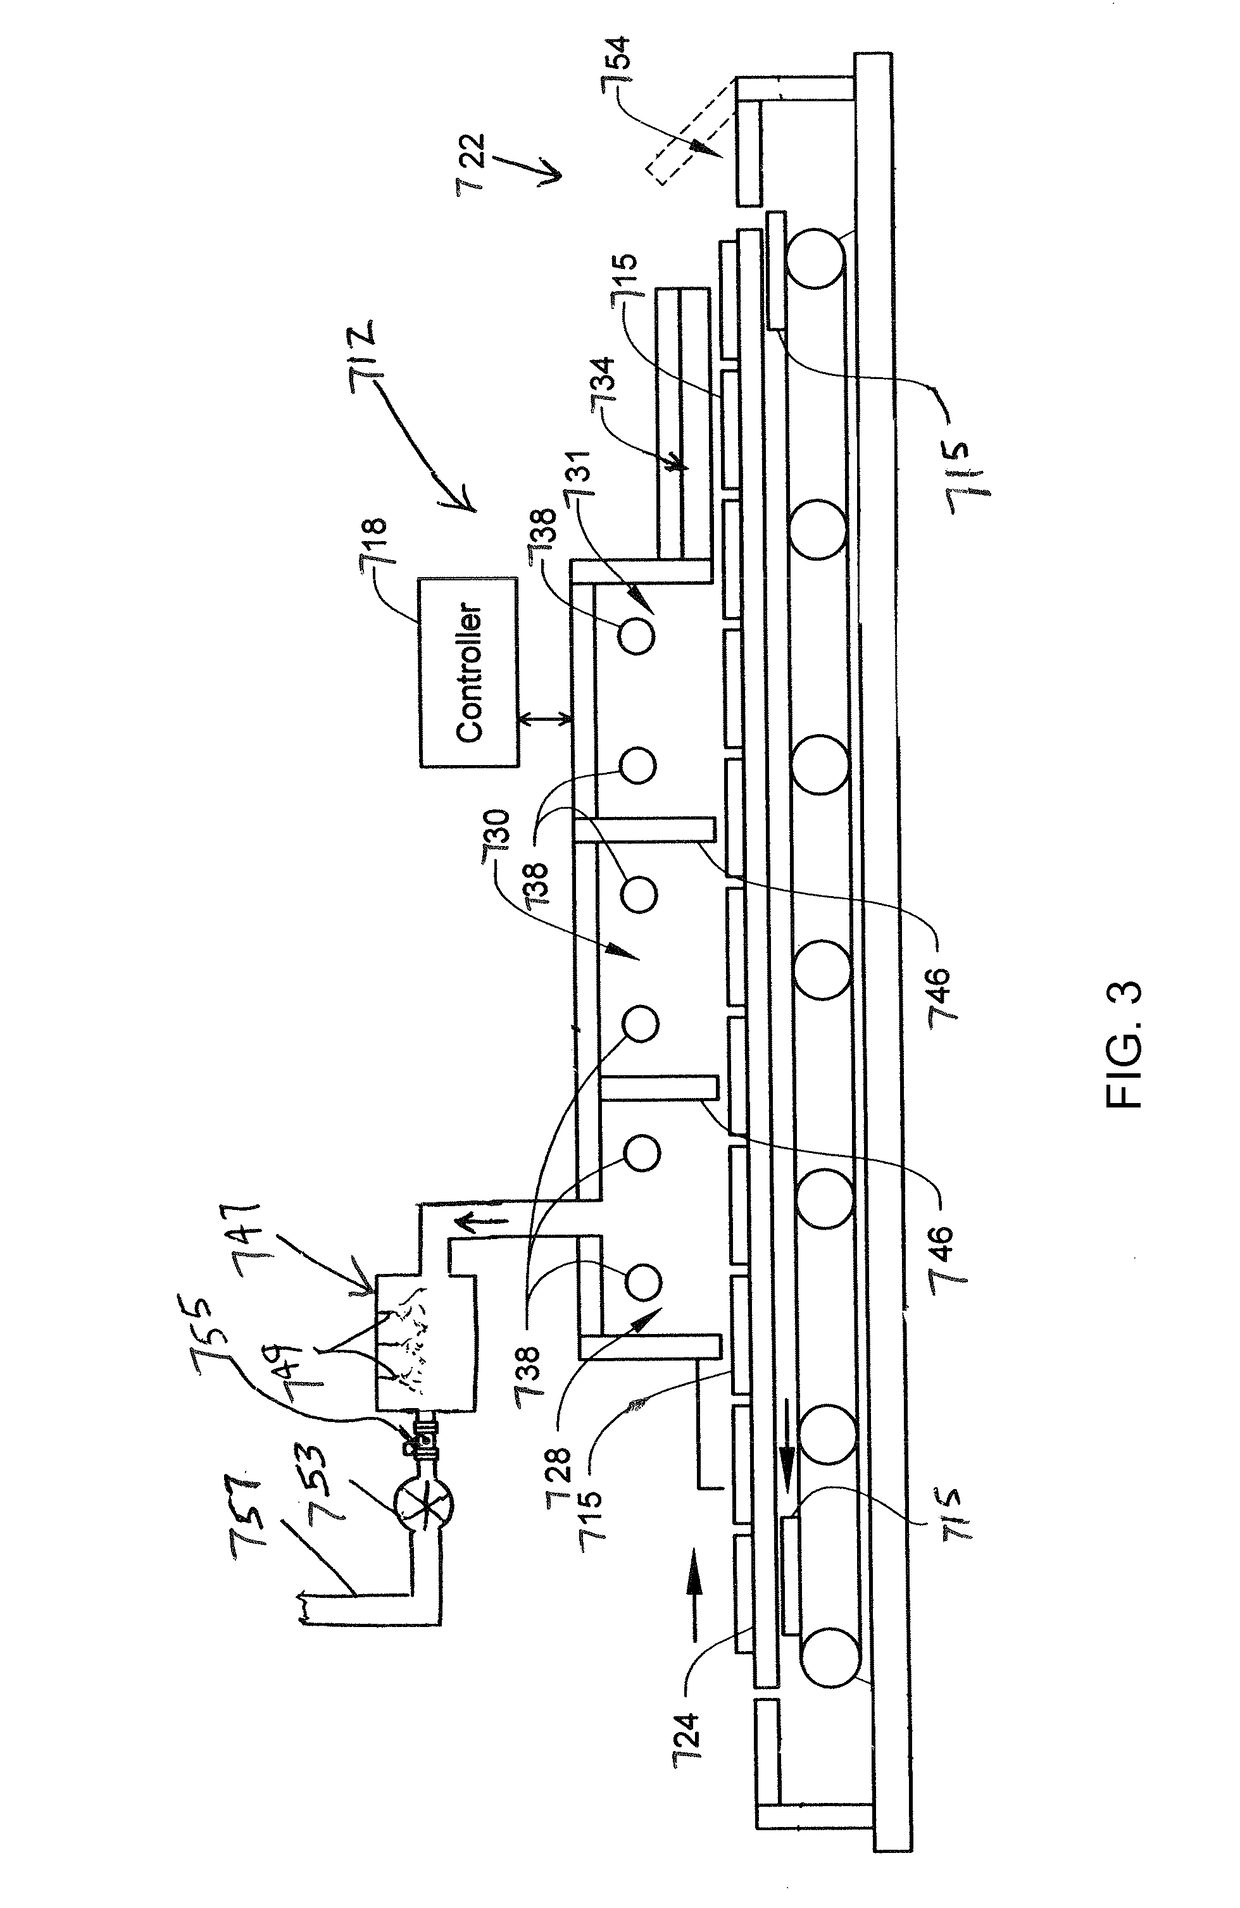 Method and system for producing metallic iron nuggets